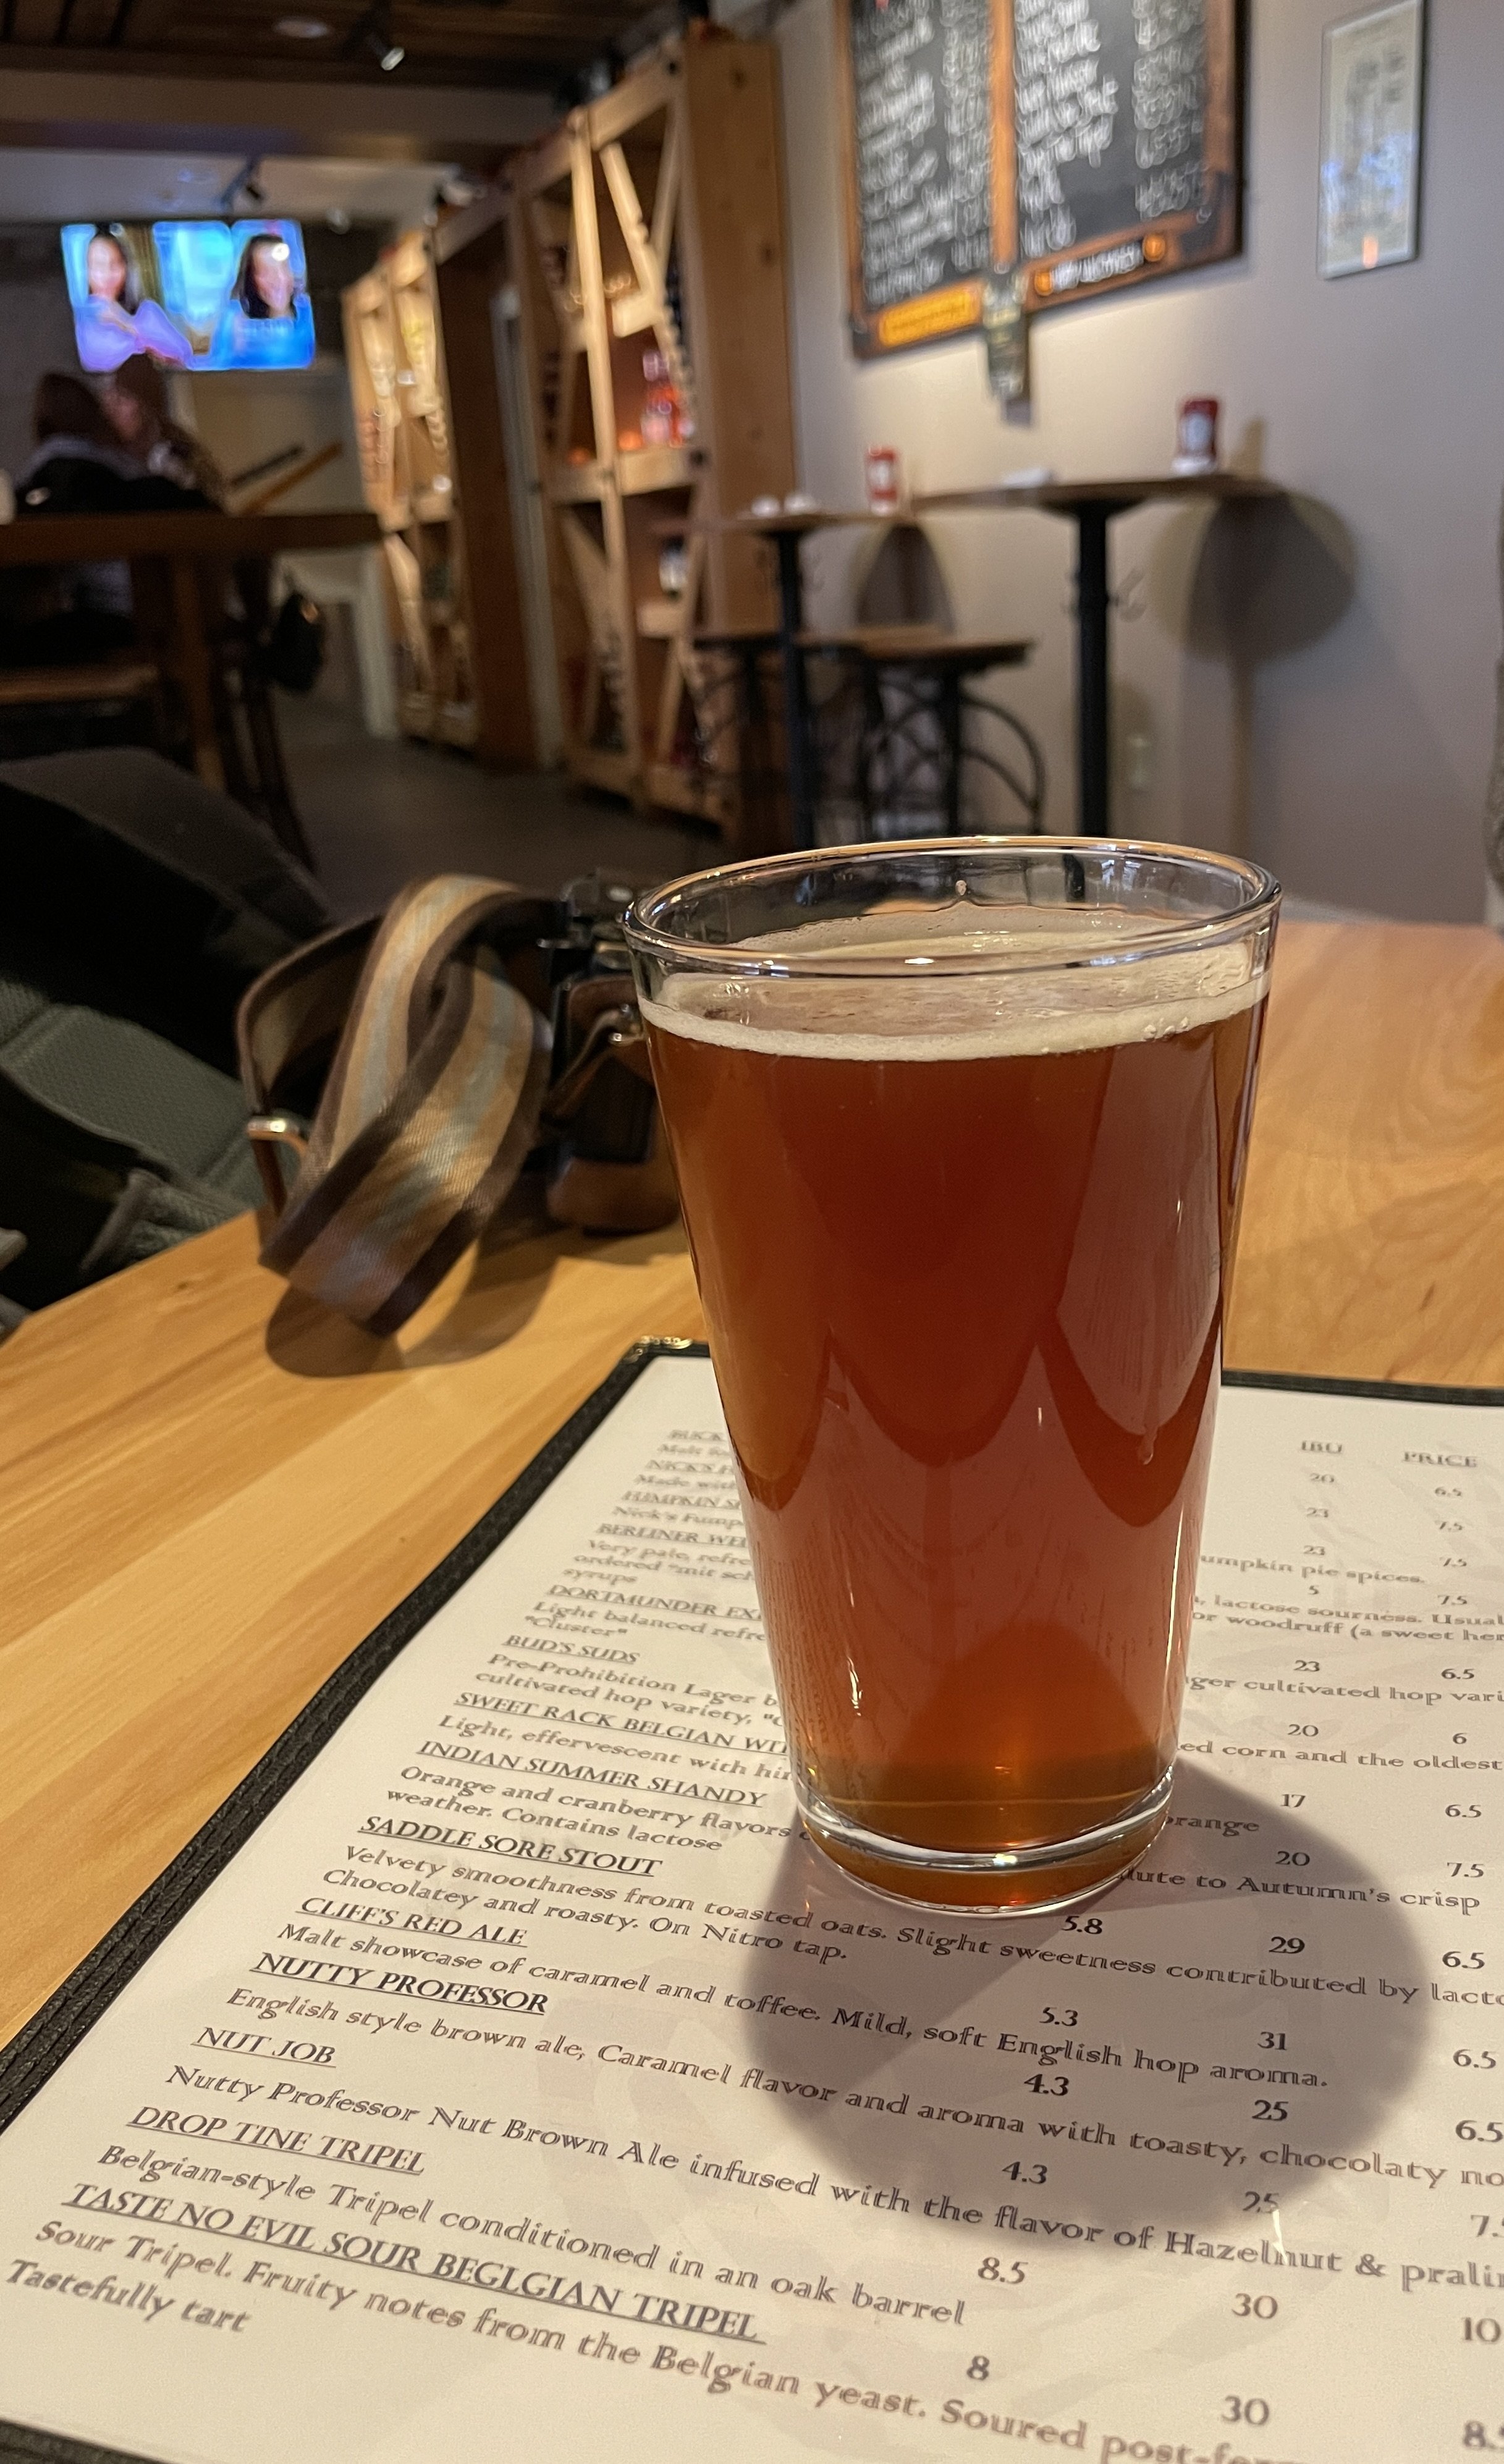  Blairstown, NJ.  Buck Hill Brewery &amp; Restaurant.    This is a pour of NUTTY PROFESSOR. Naomi drove on to Wellsboro, Pennsylvania after this lunch stop. 